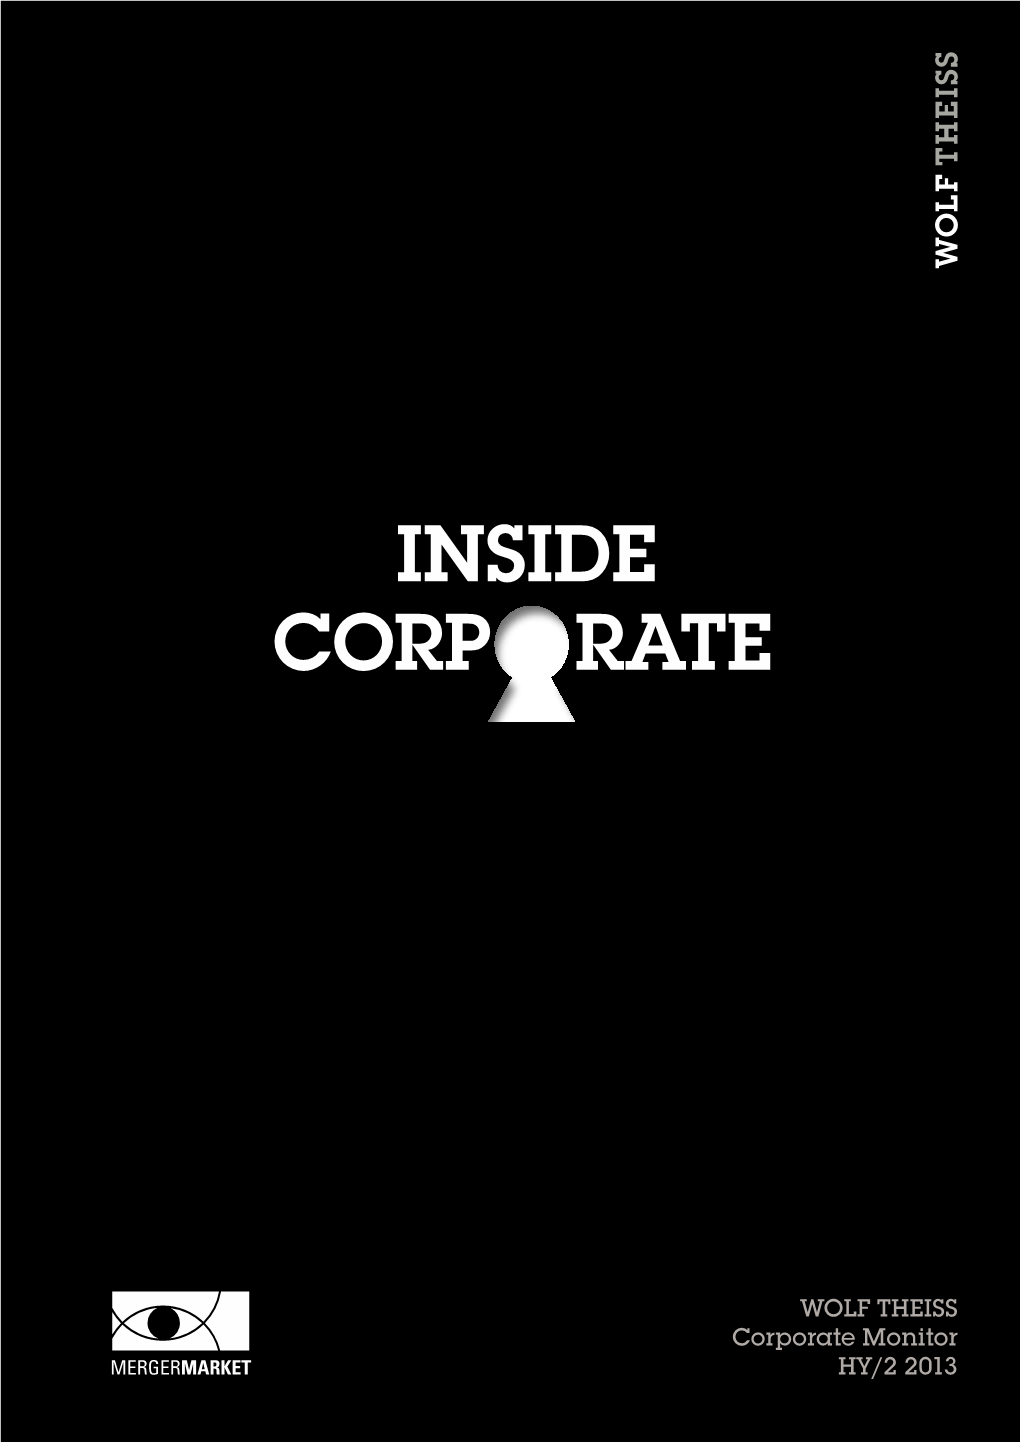 Corp Rate Inside